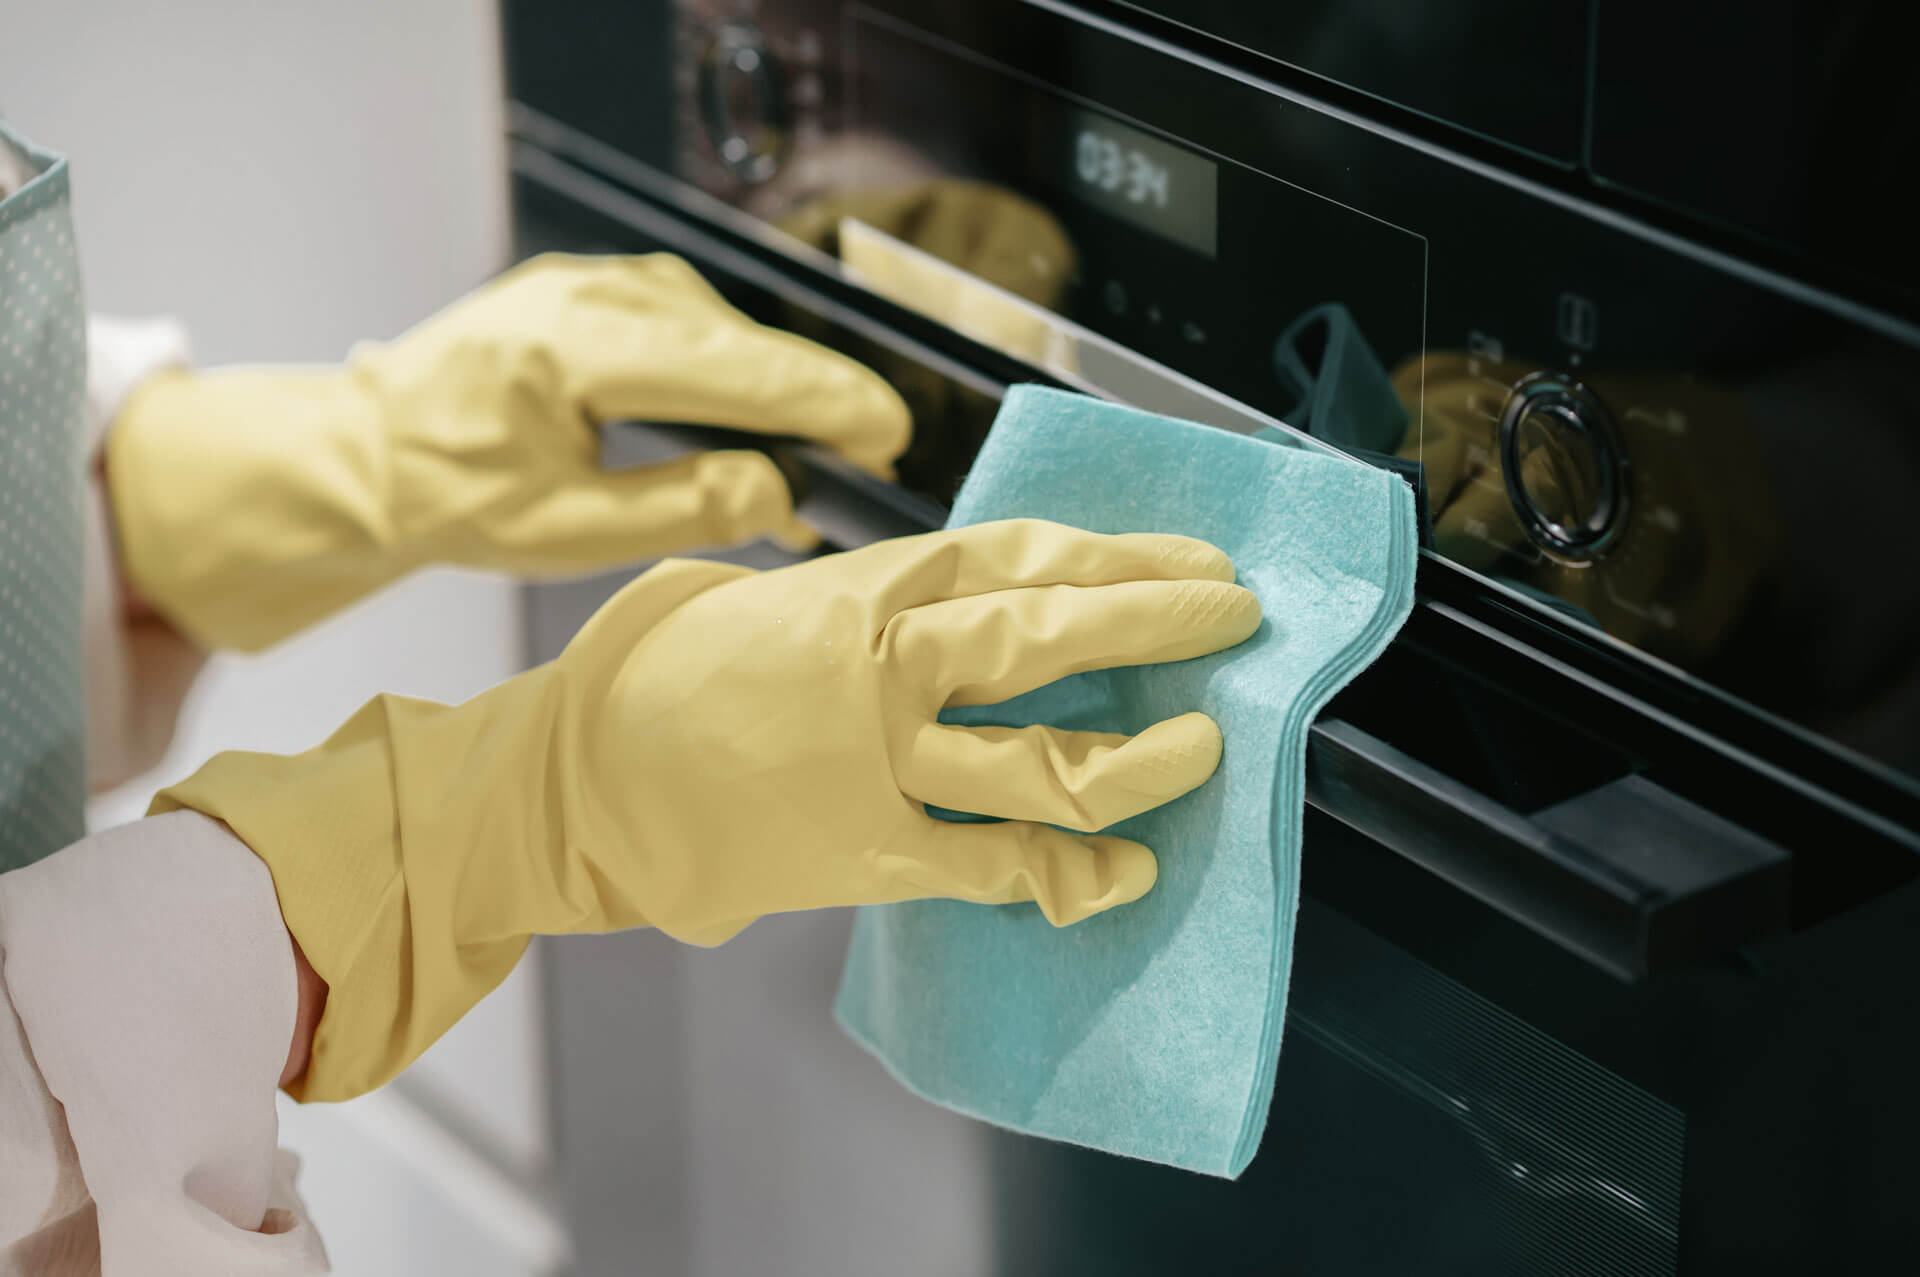 A maid from Pompano Beach, Florida providing cleaning services while wearing yellow gloves and cleaning an oven.